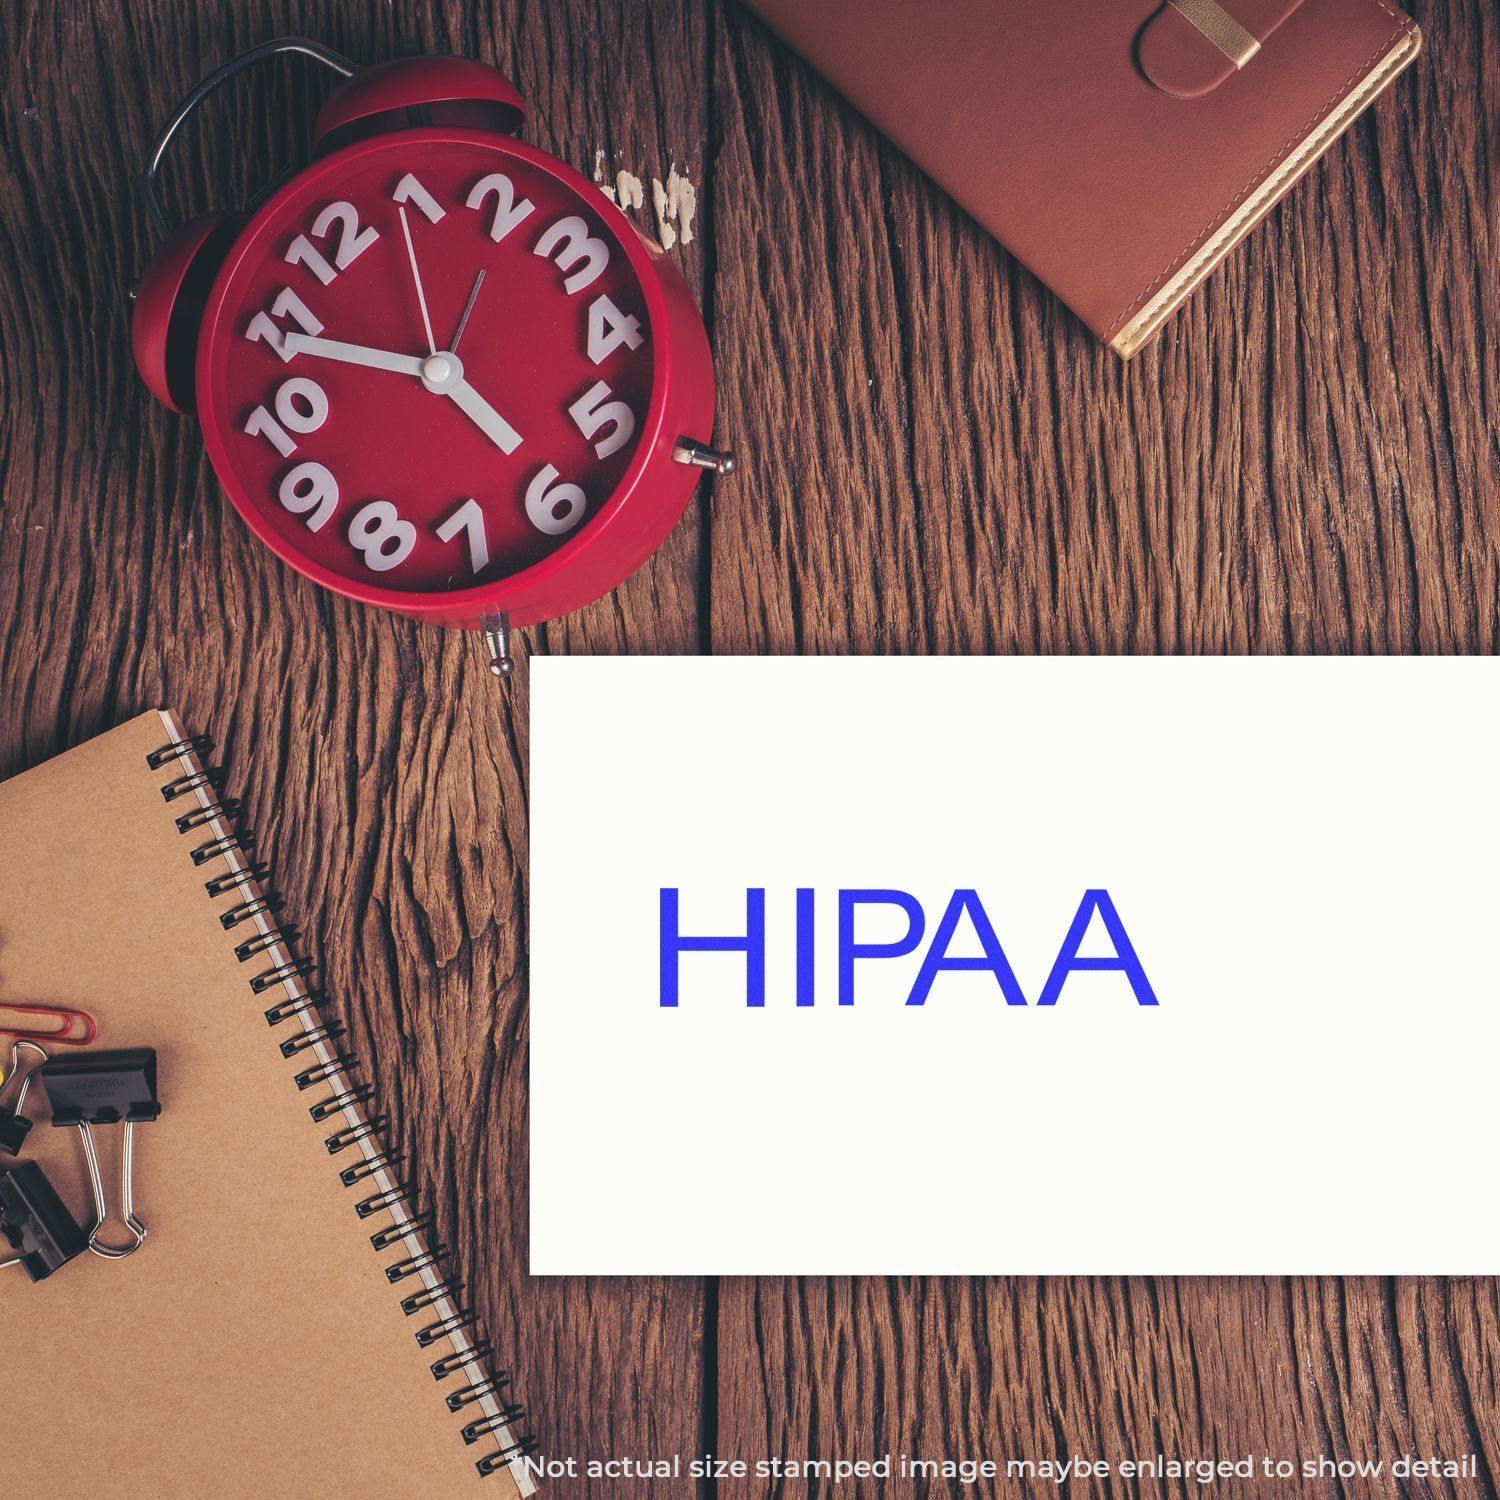 A self-inking stamp with a stamped image showing how the text "HIPAA" in a large bold font is displayed by it.